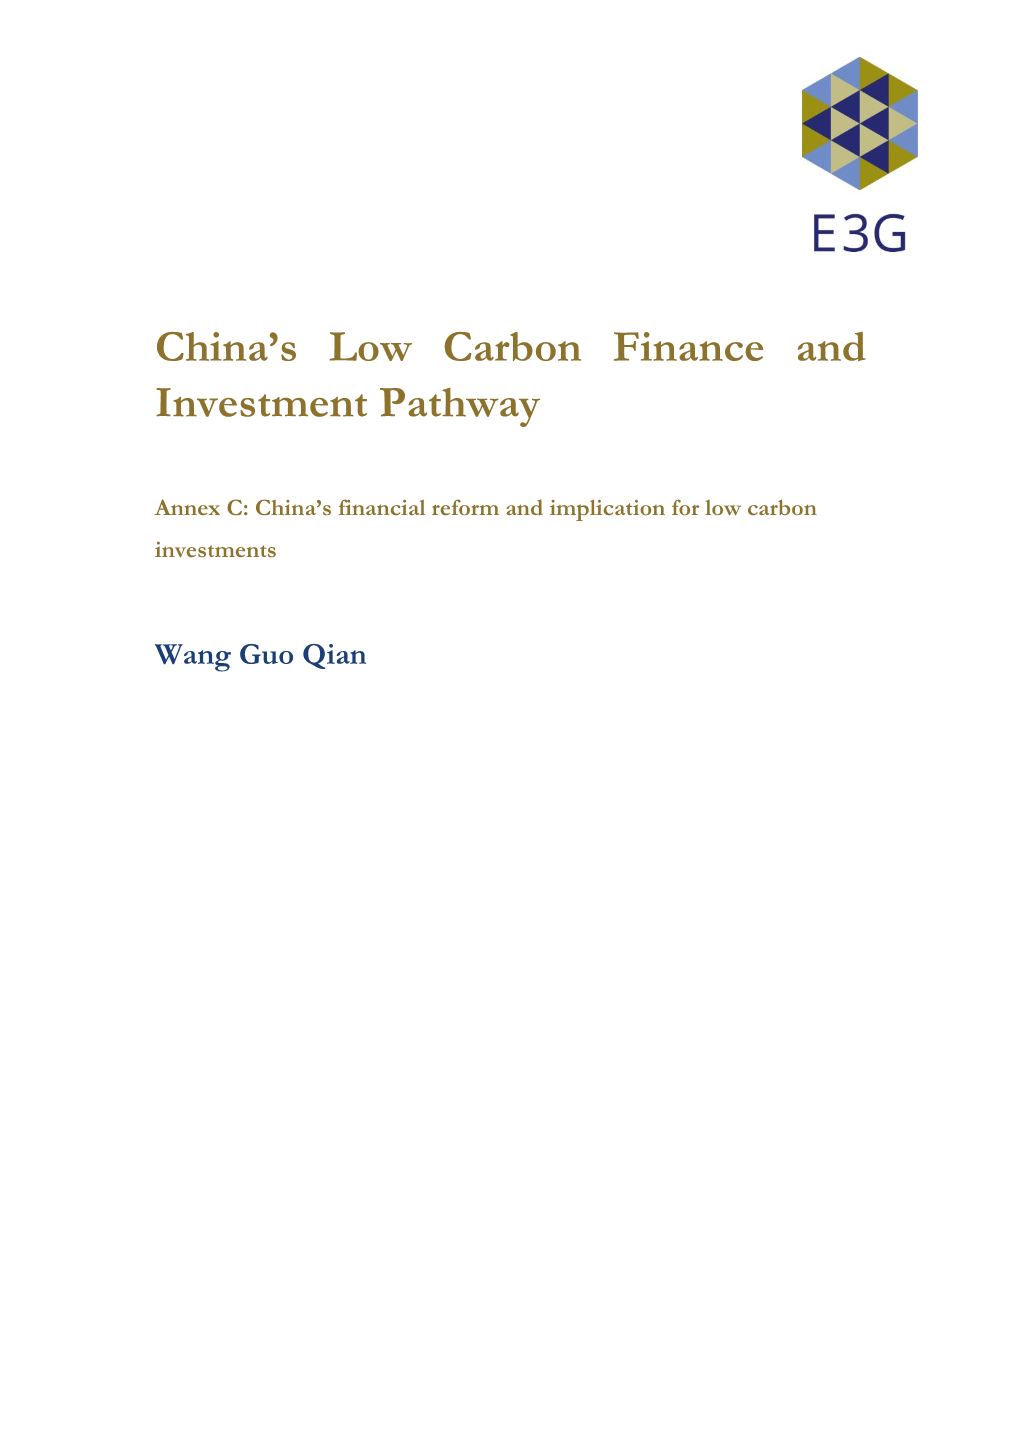 China's Low Carbon Finance and Investment Pathway